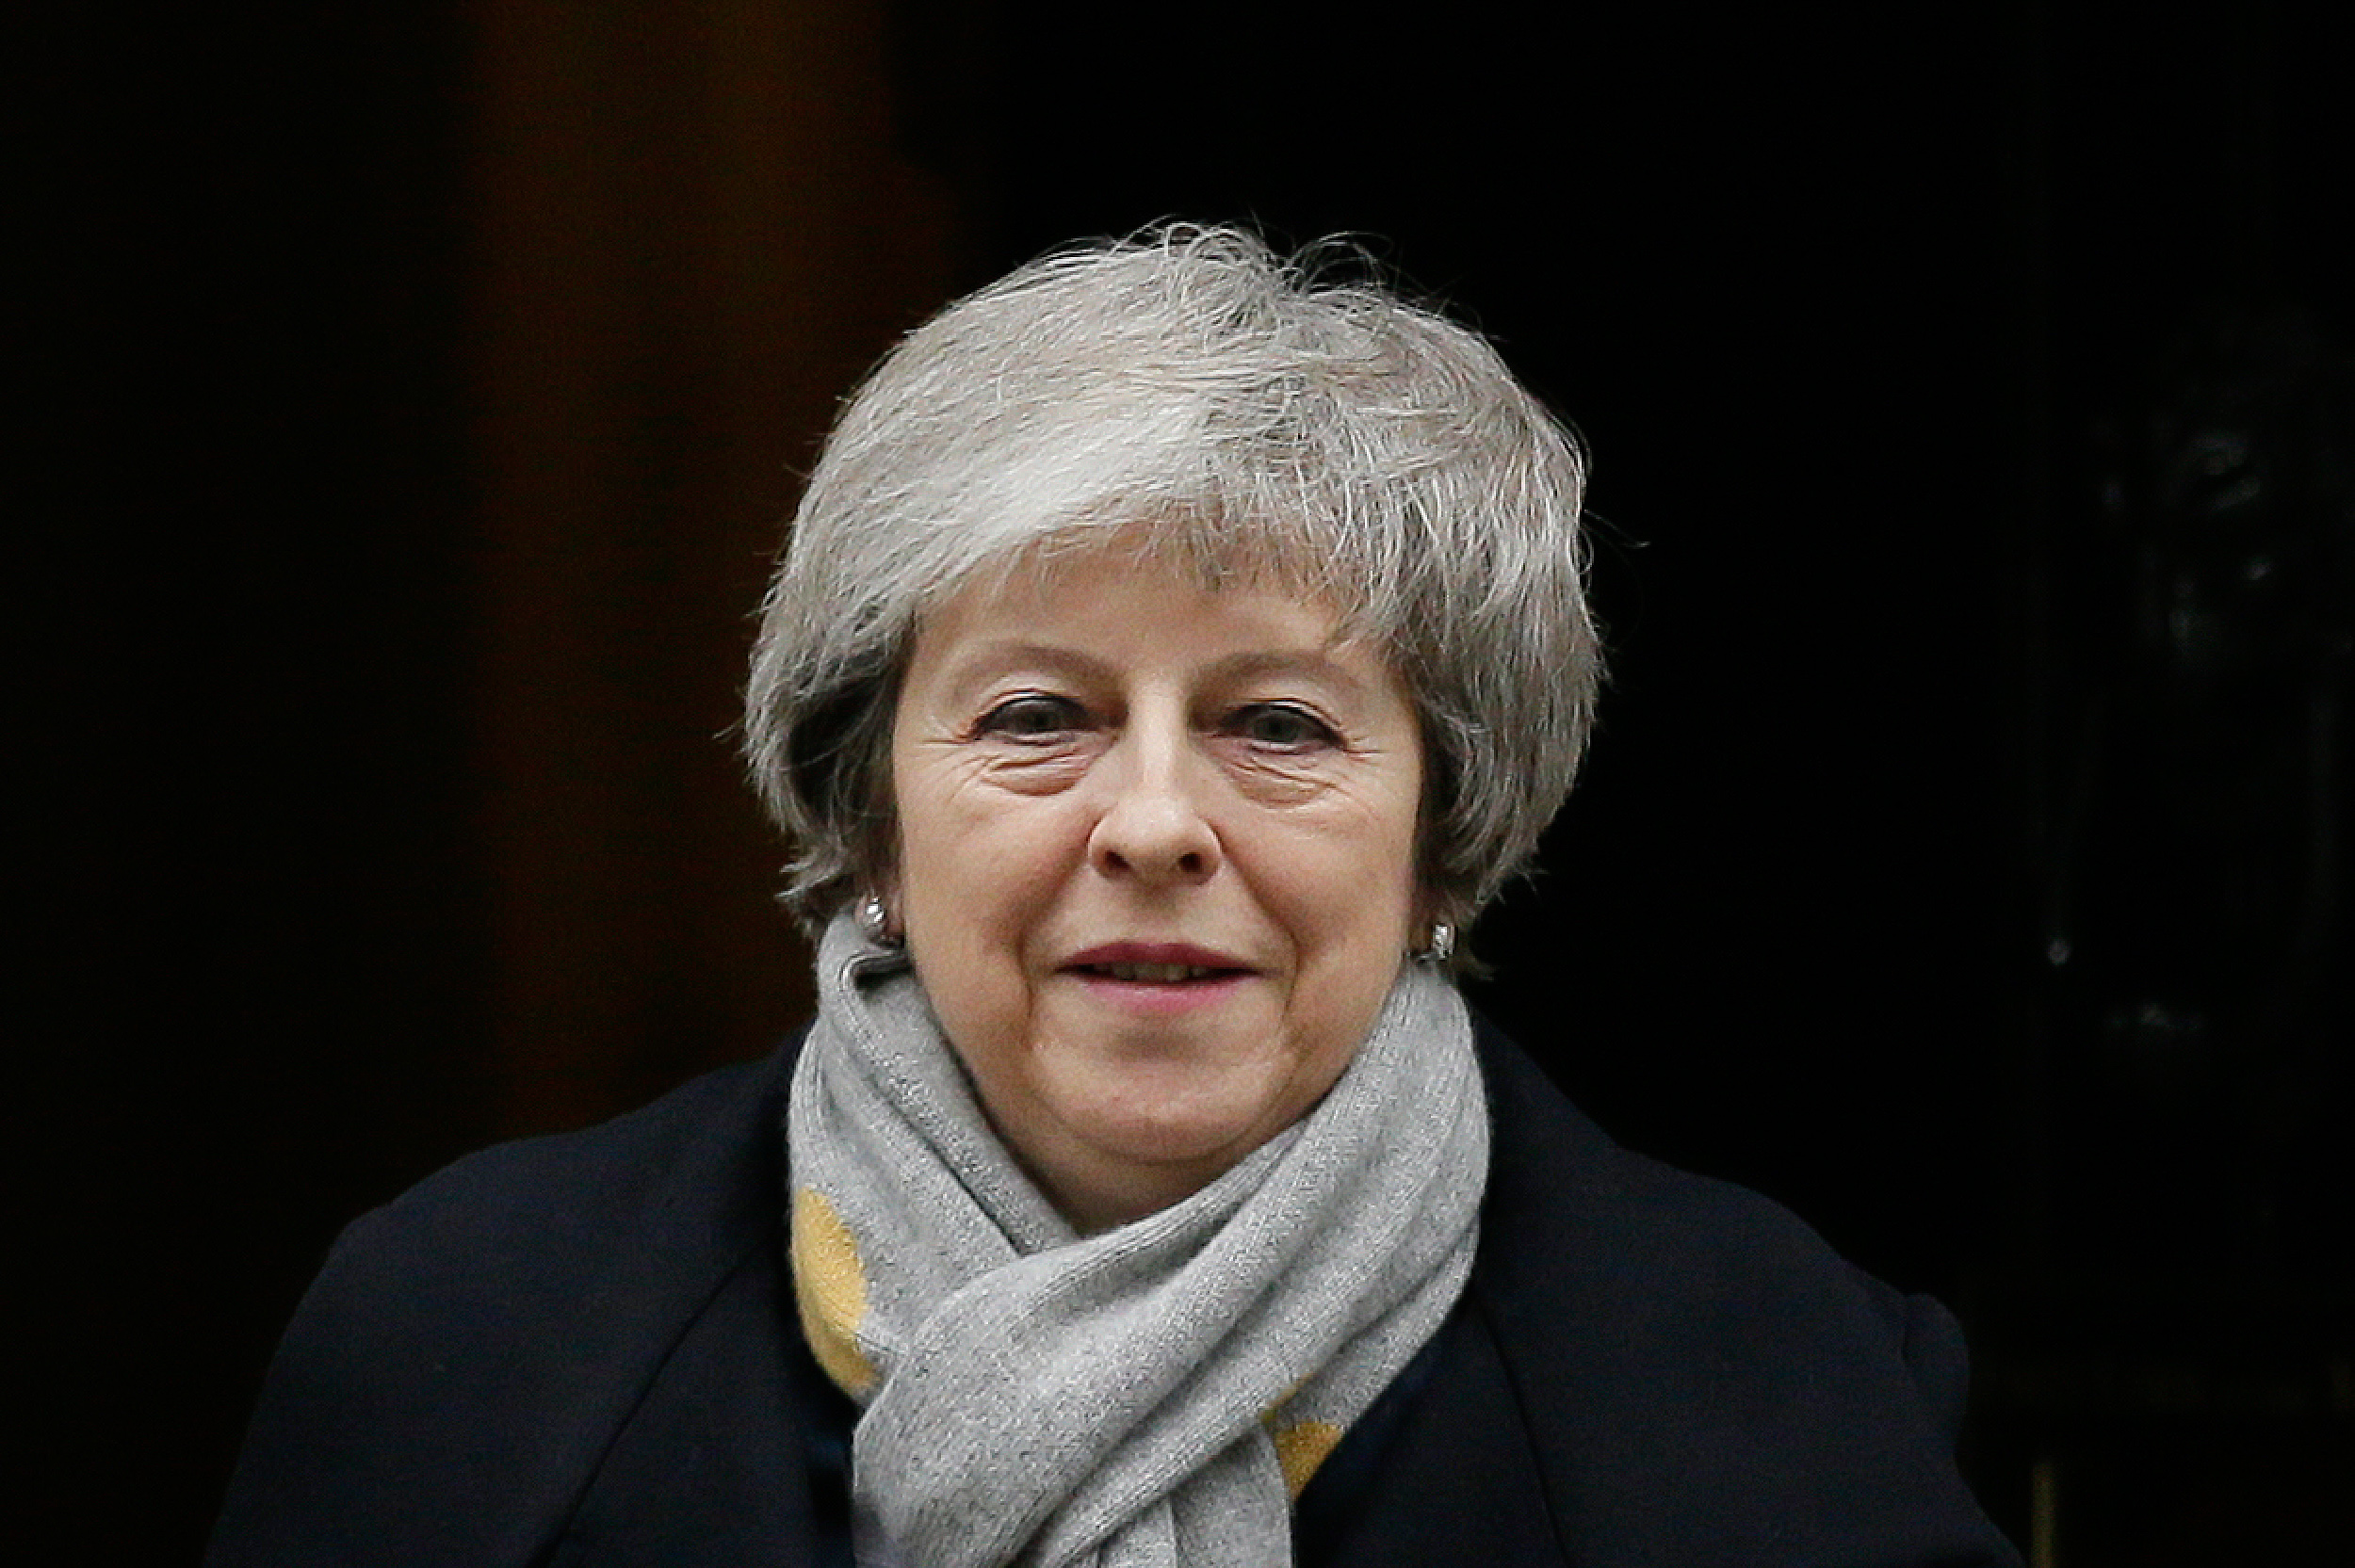 British PM urges MPs to "put self-interest aside," work together towards Brexit